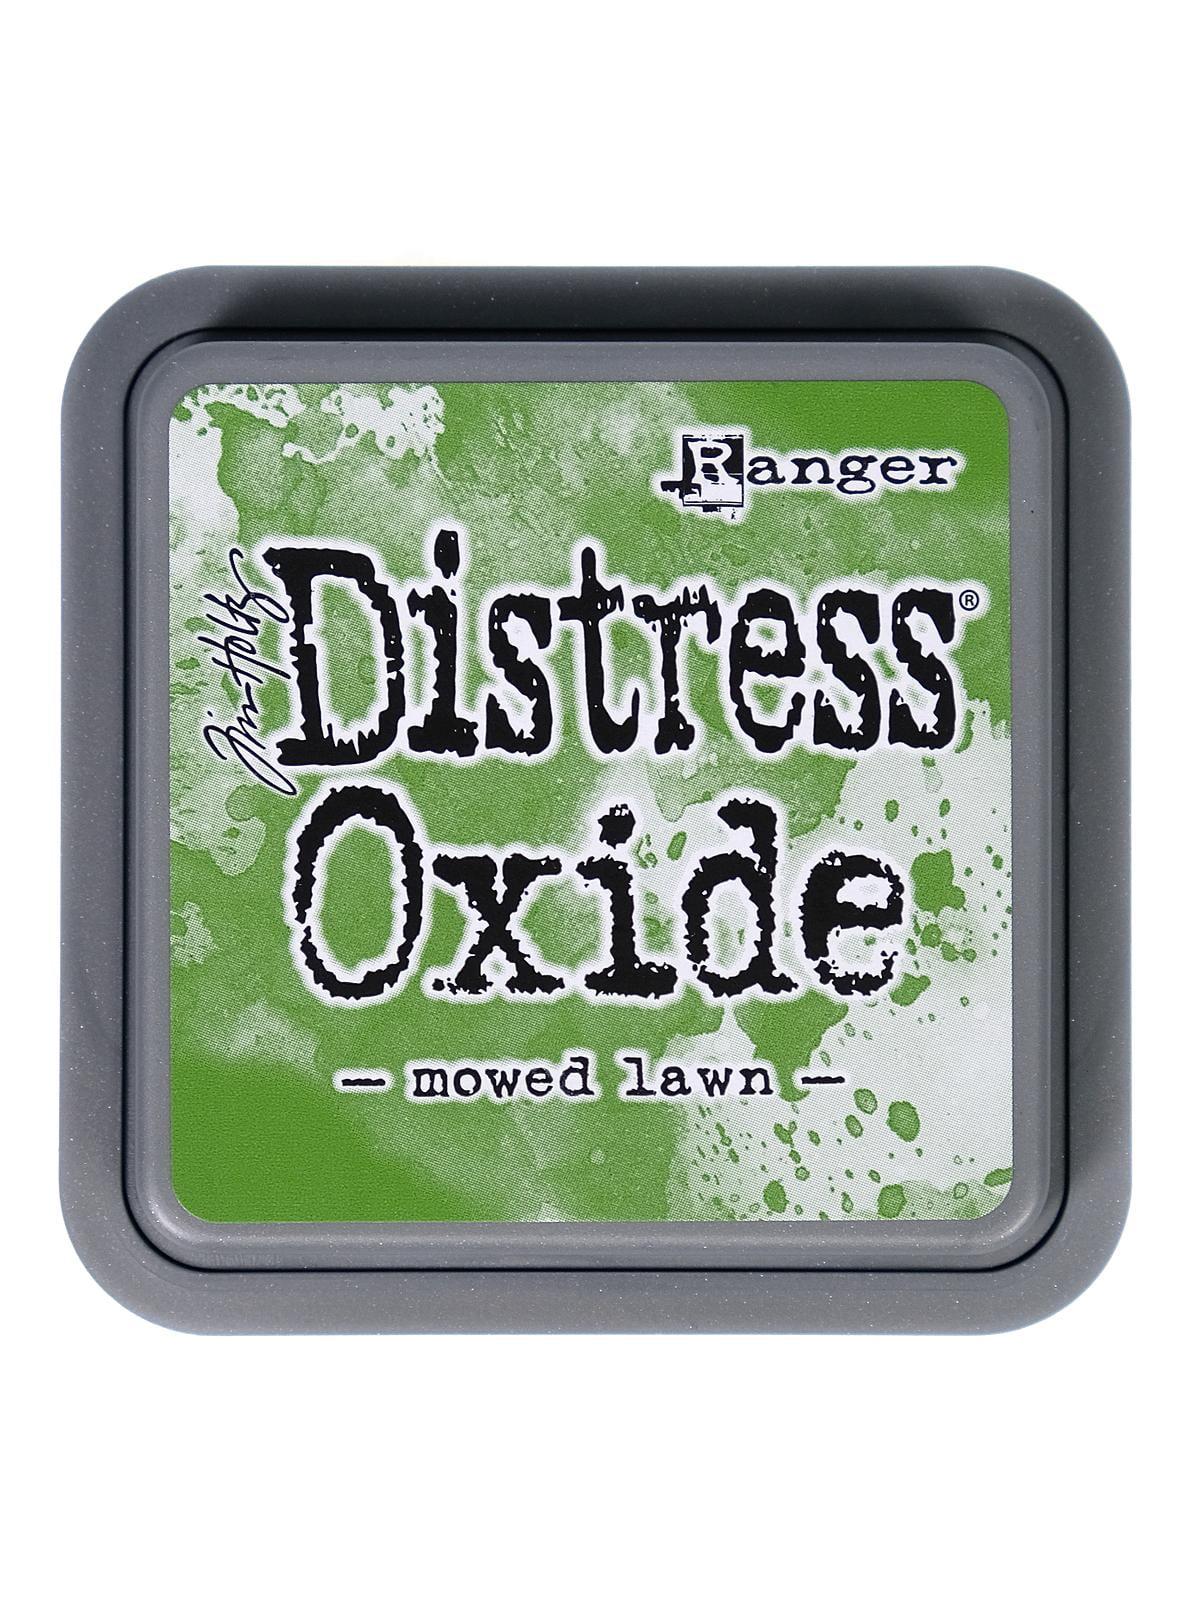 Tim Holtz Distress Oxides ripe persimmon, pad (pack of 3 